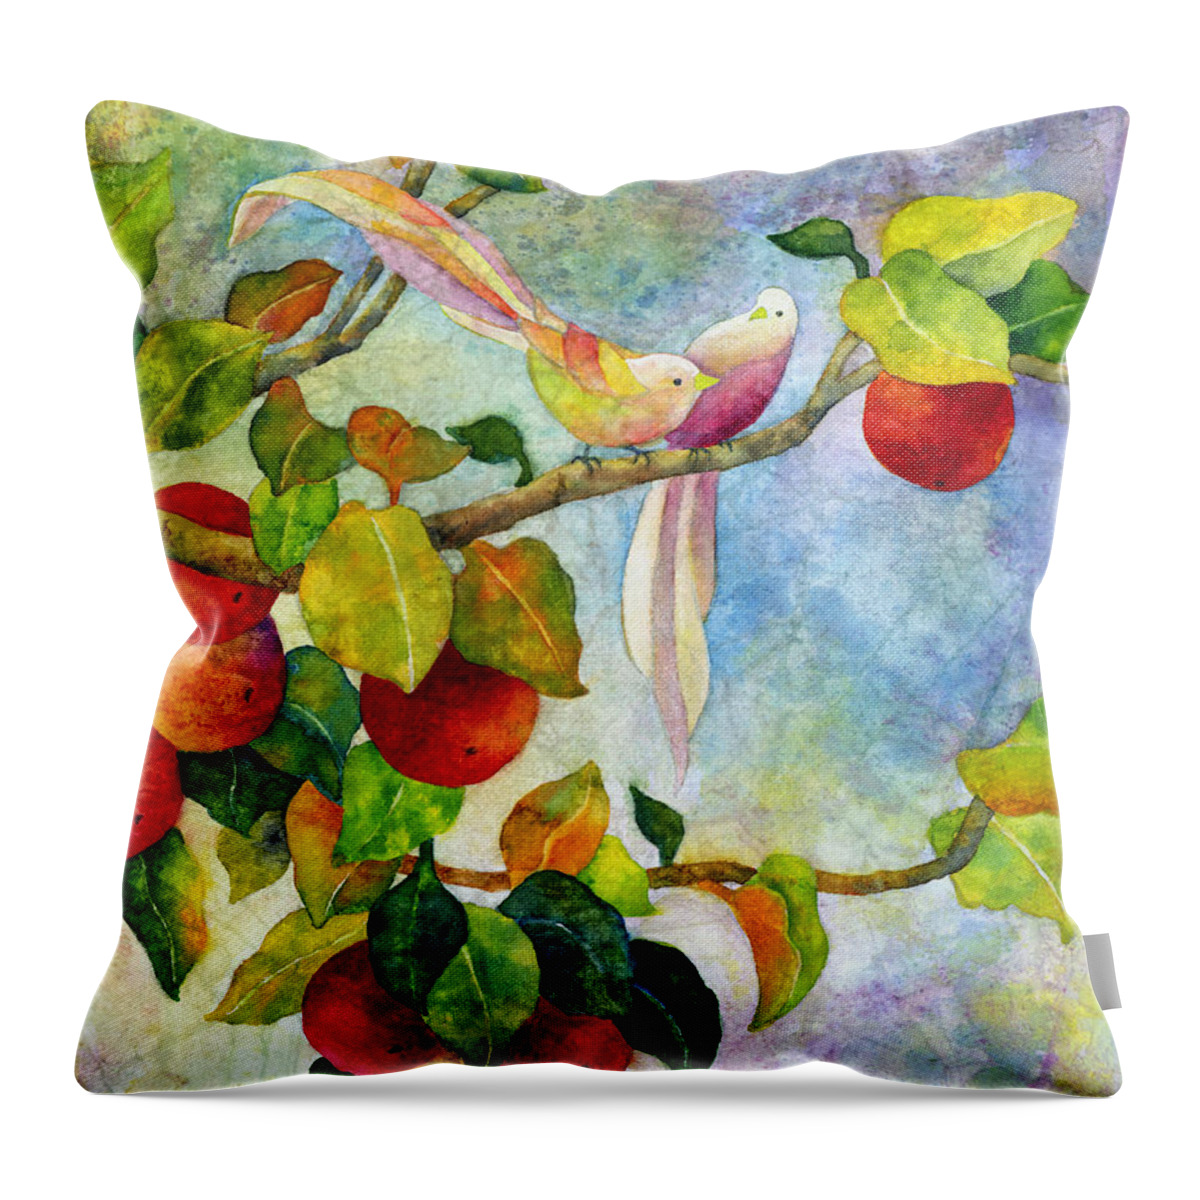 Birds Throw Pillow featuring the painting Birds on Apple Tree by Hailey E Herrera